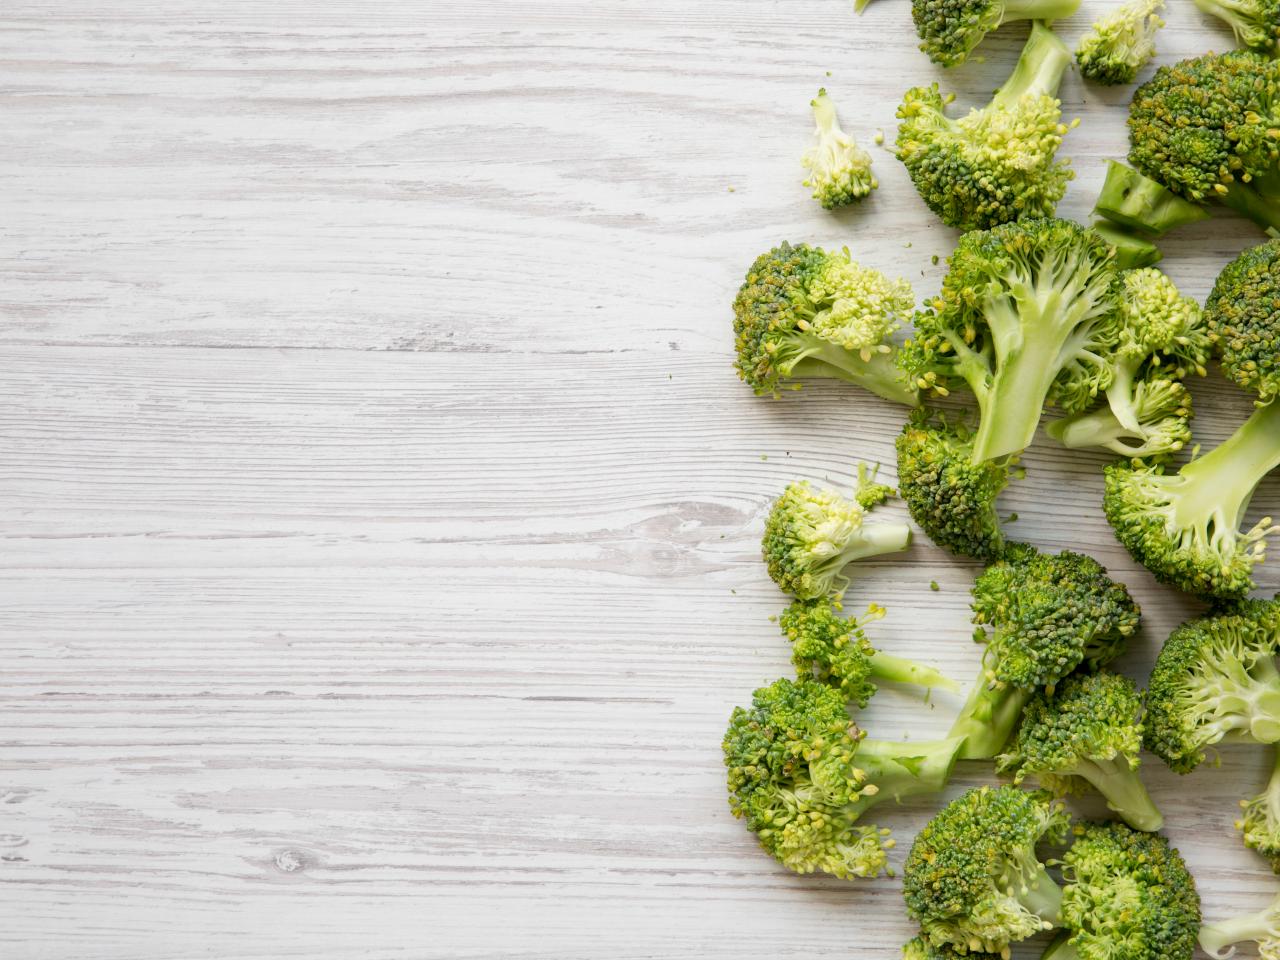 Tips for Perfectly Frozen Broccoli Every Time